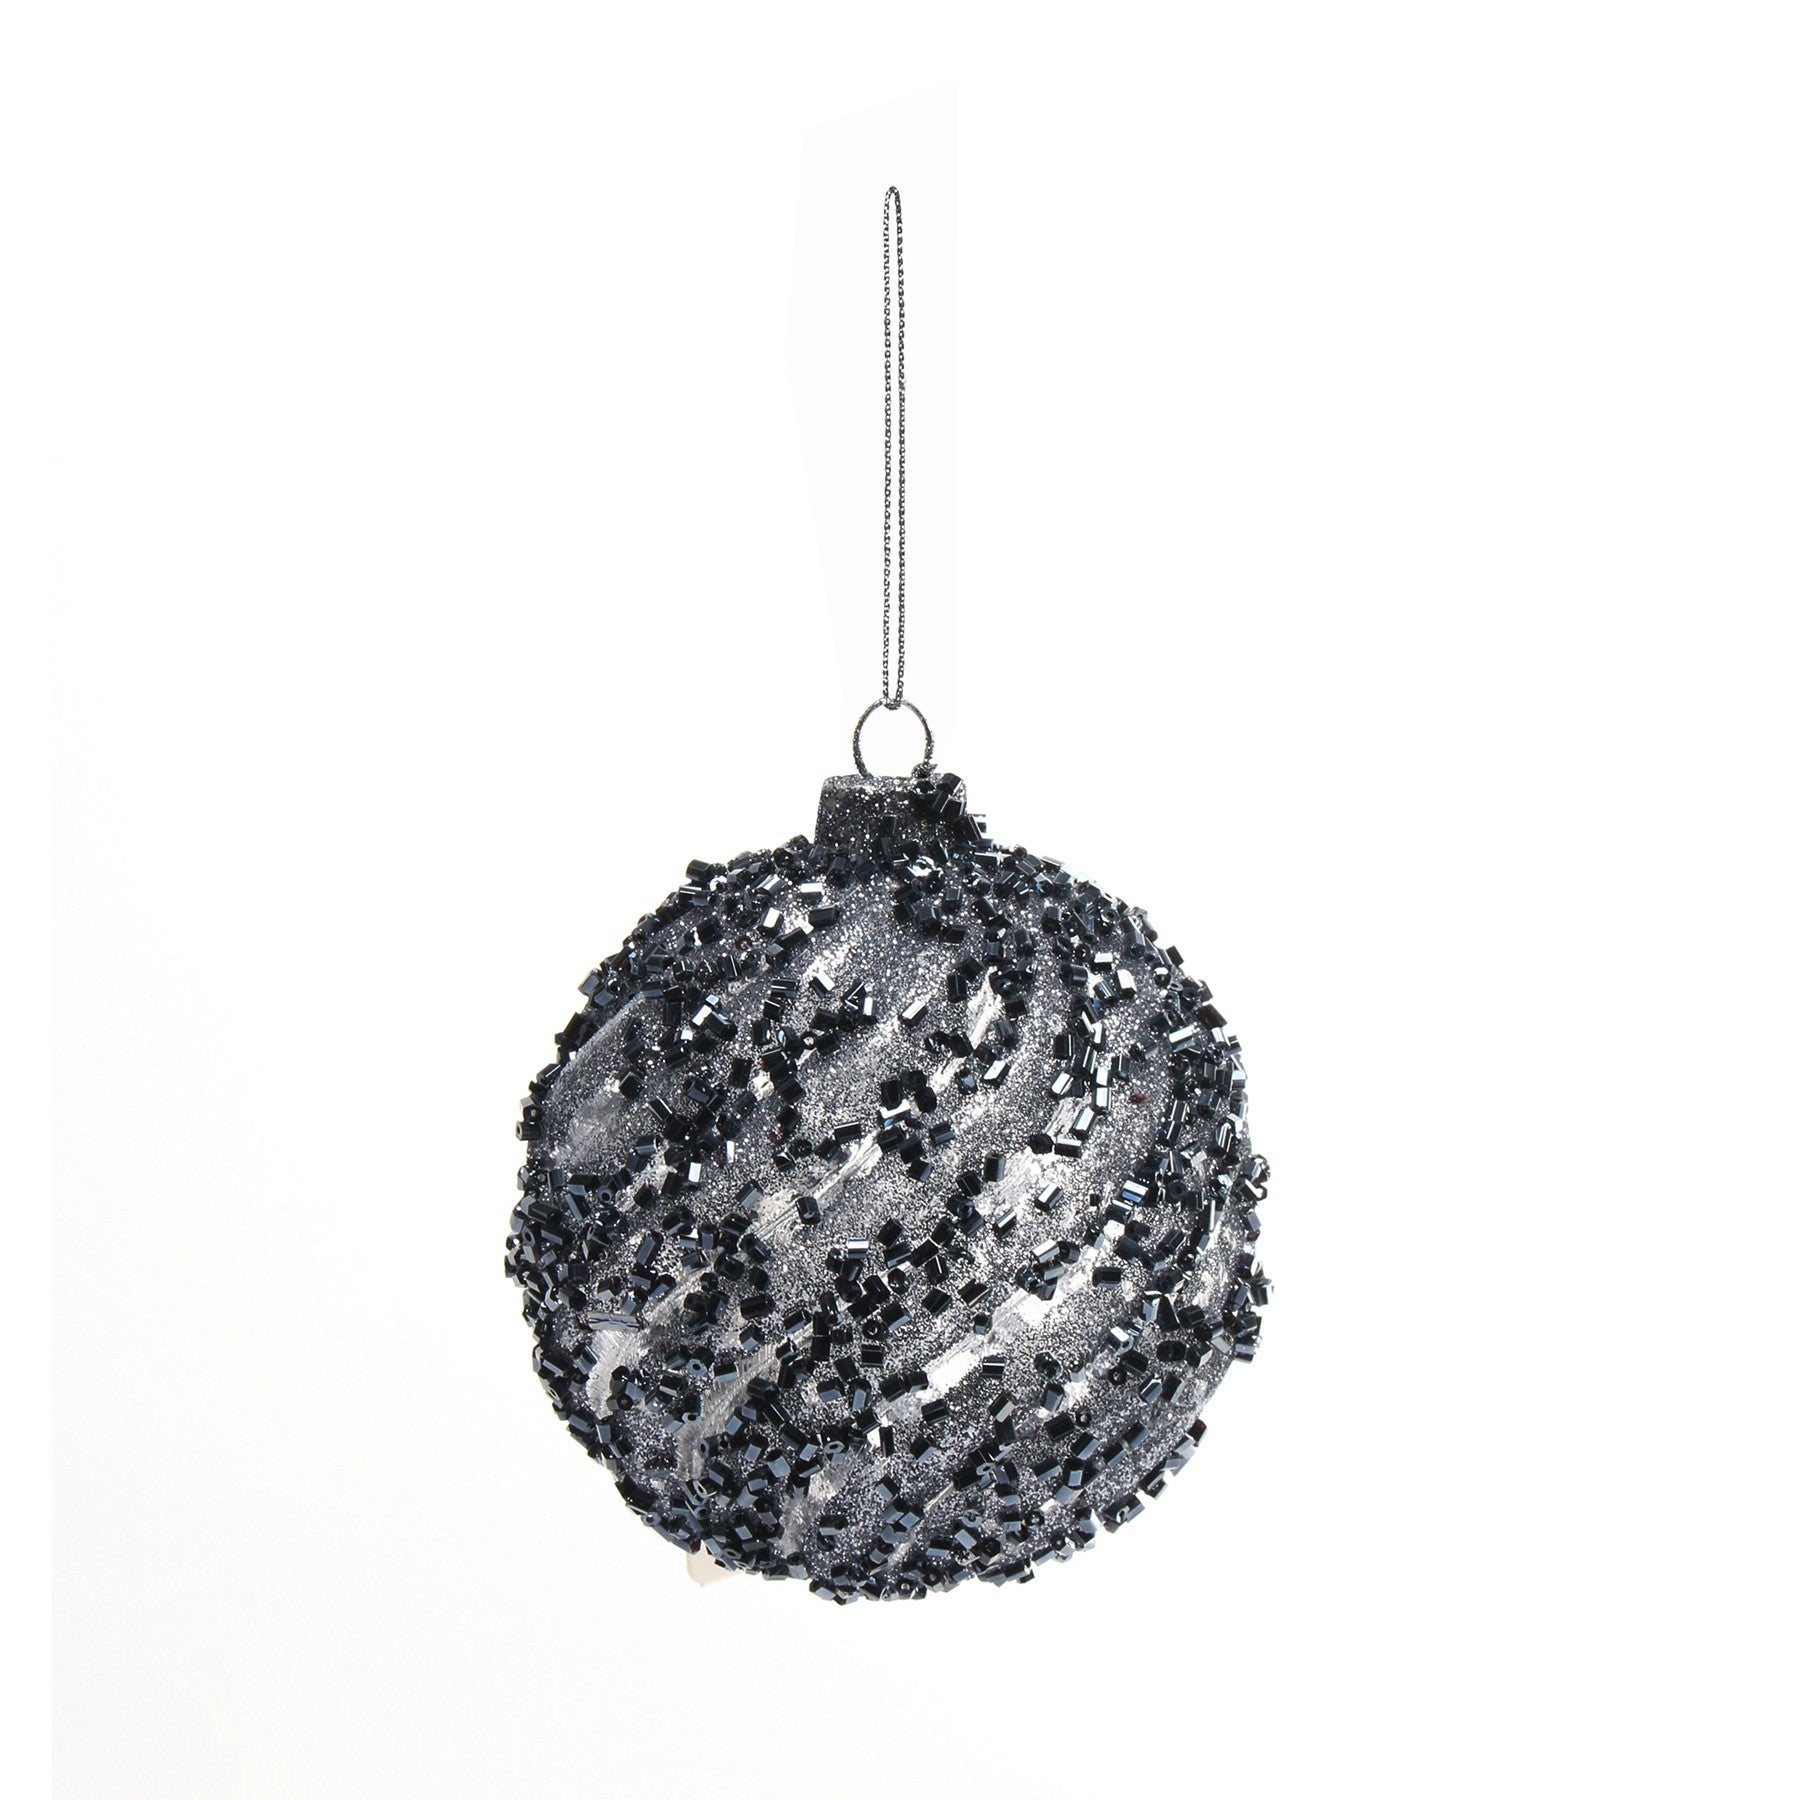 View Midnight Blue Sequin Glass Bauble 80mm information